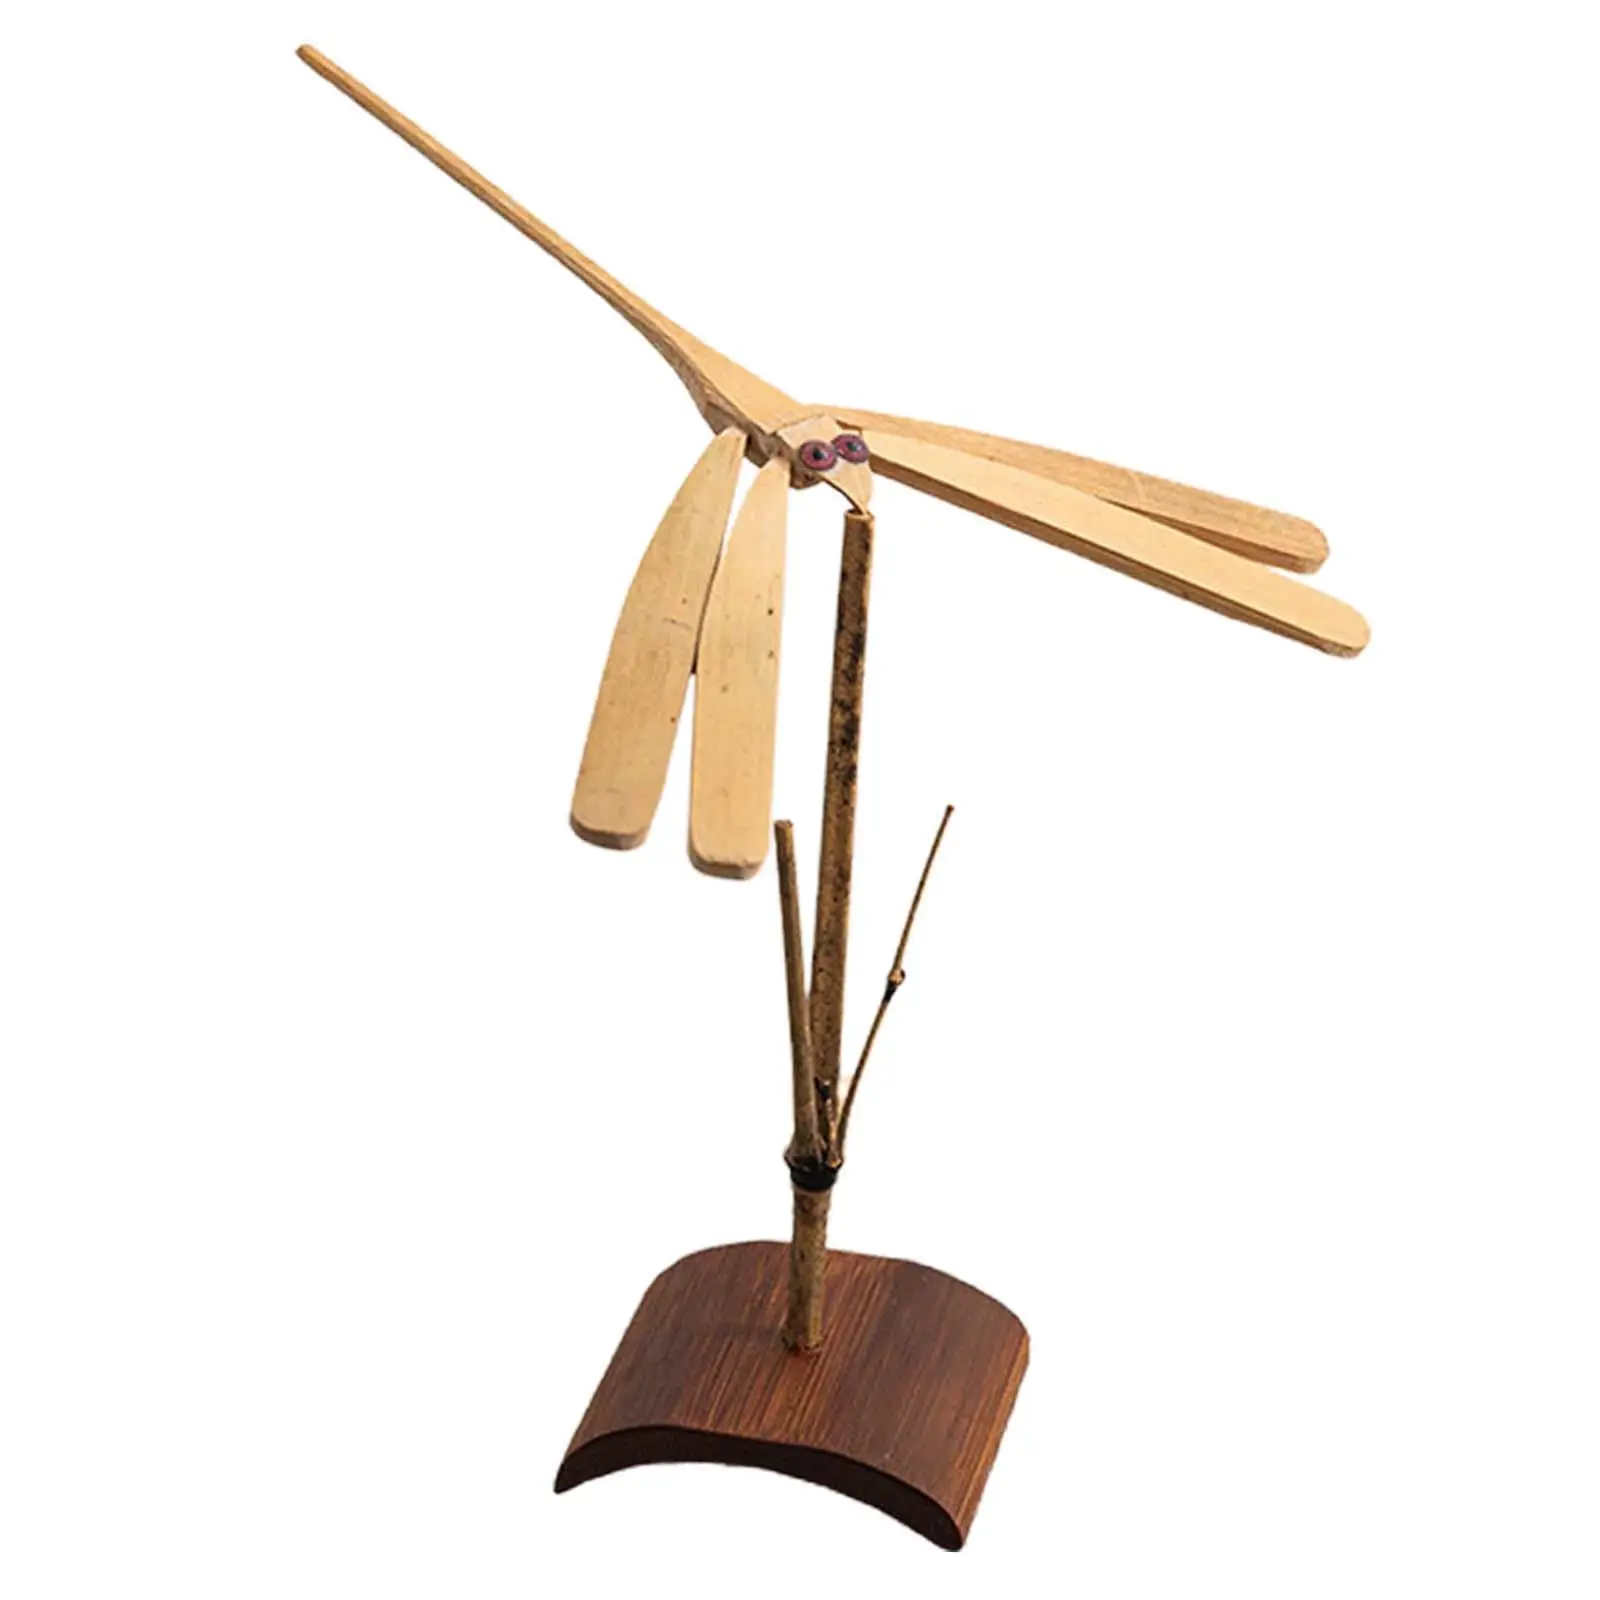 Flying Helicopter Toy with Stable Base Handmade Crafts Bamboo Propeller for Holidays Bedroom Gift Home Decor Aniversary